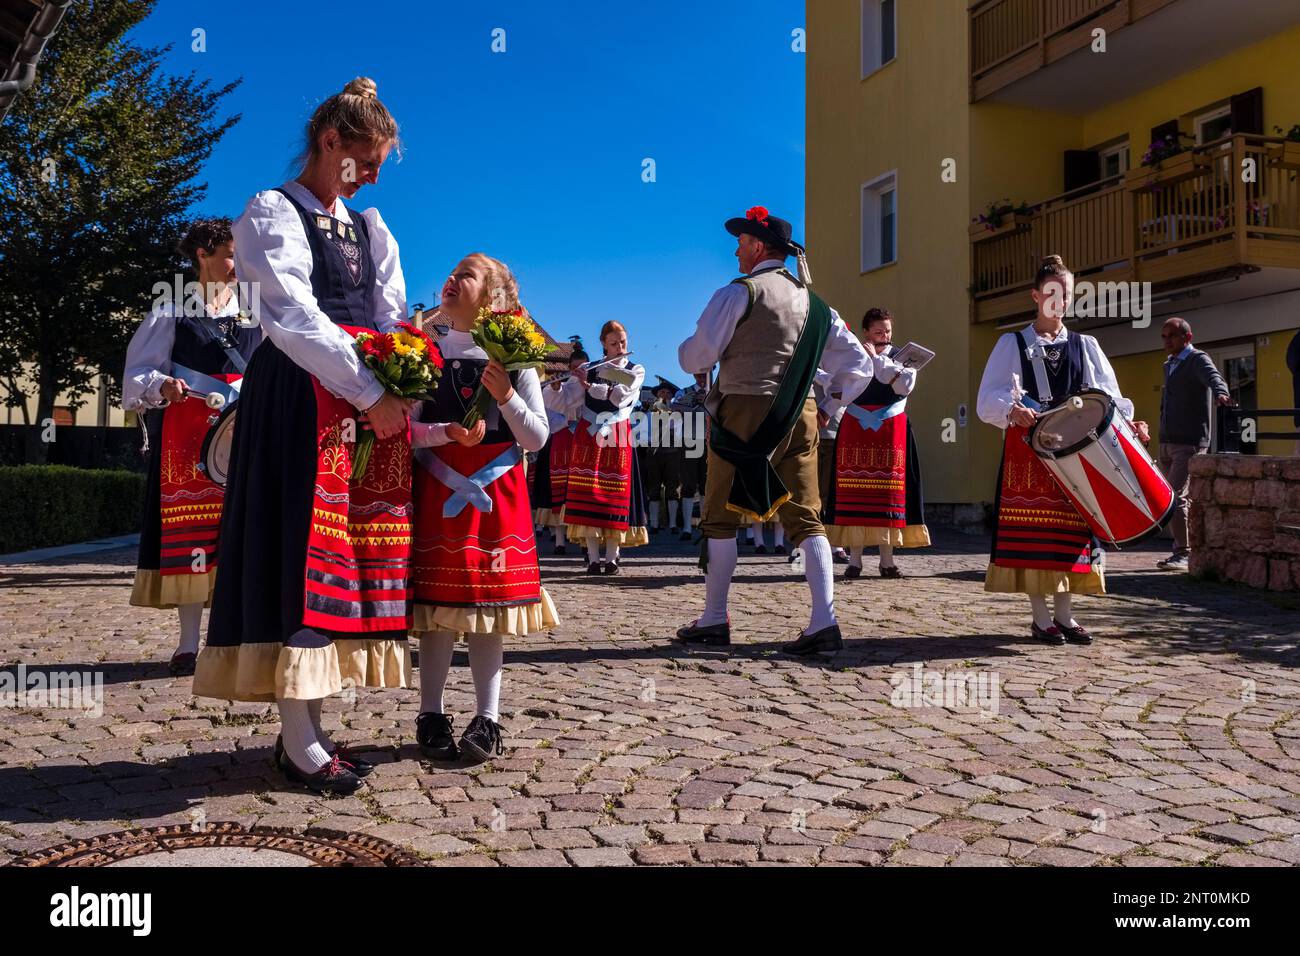 Traditionally dressed people play music during the Almabtrieb, the cattle drive from the mountain pasture, in the village of Fai della Paganella. Stock Photo